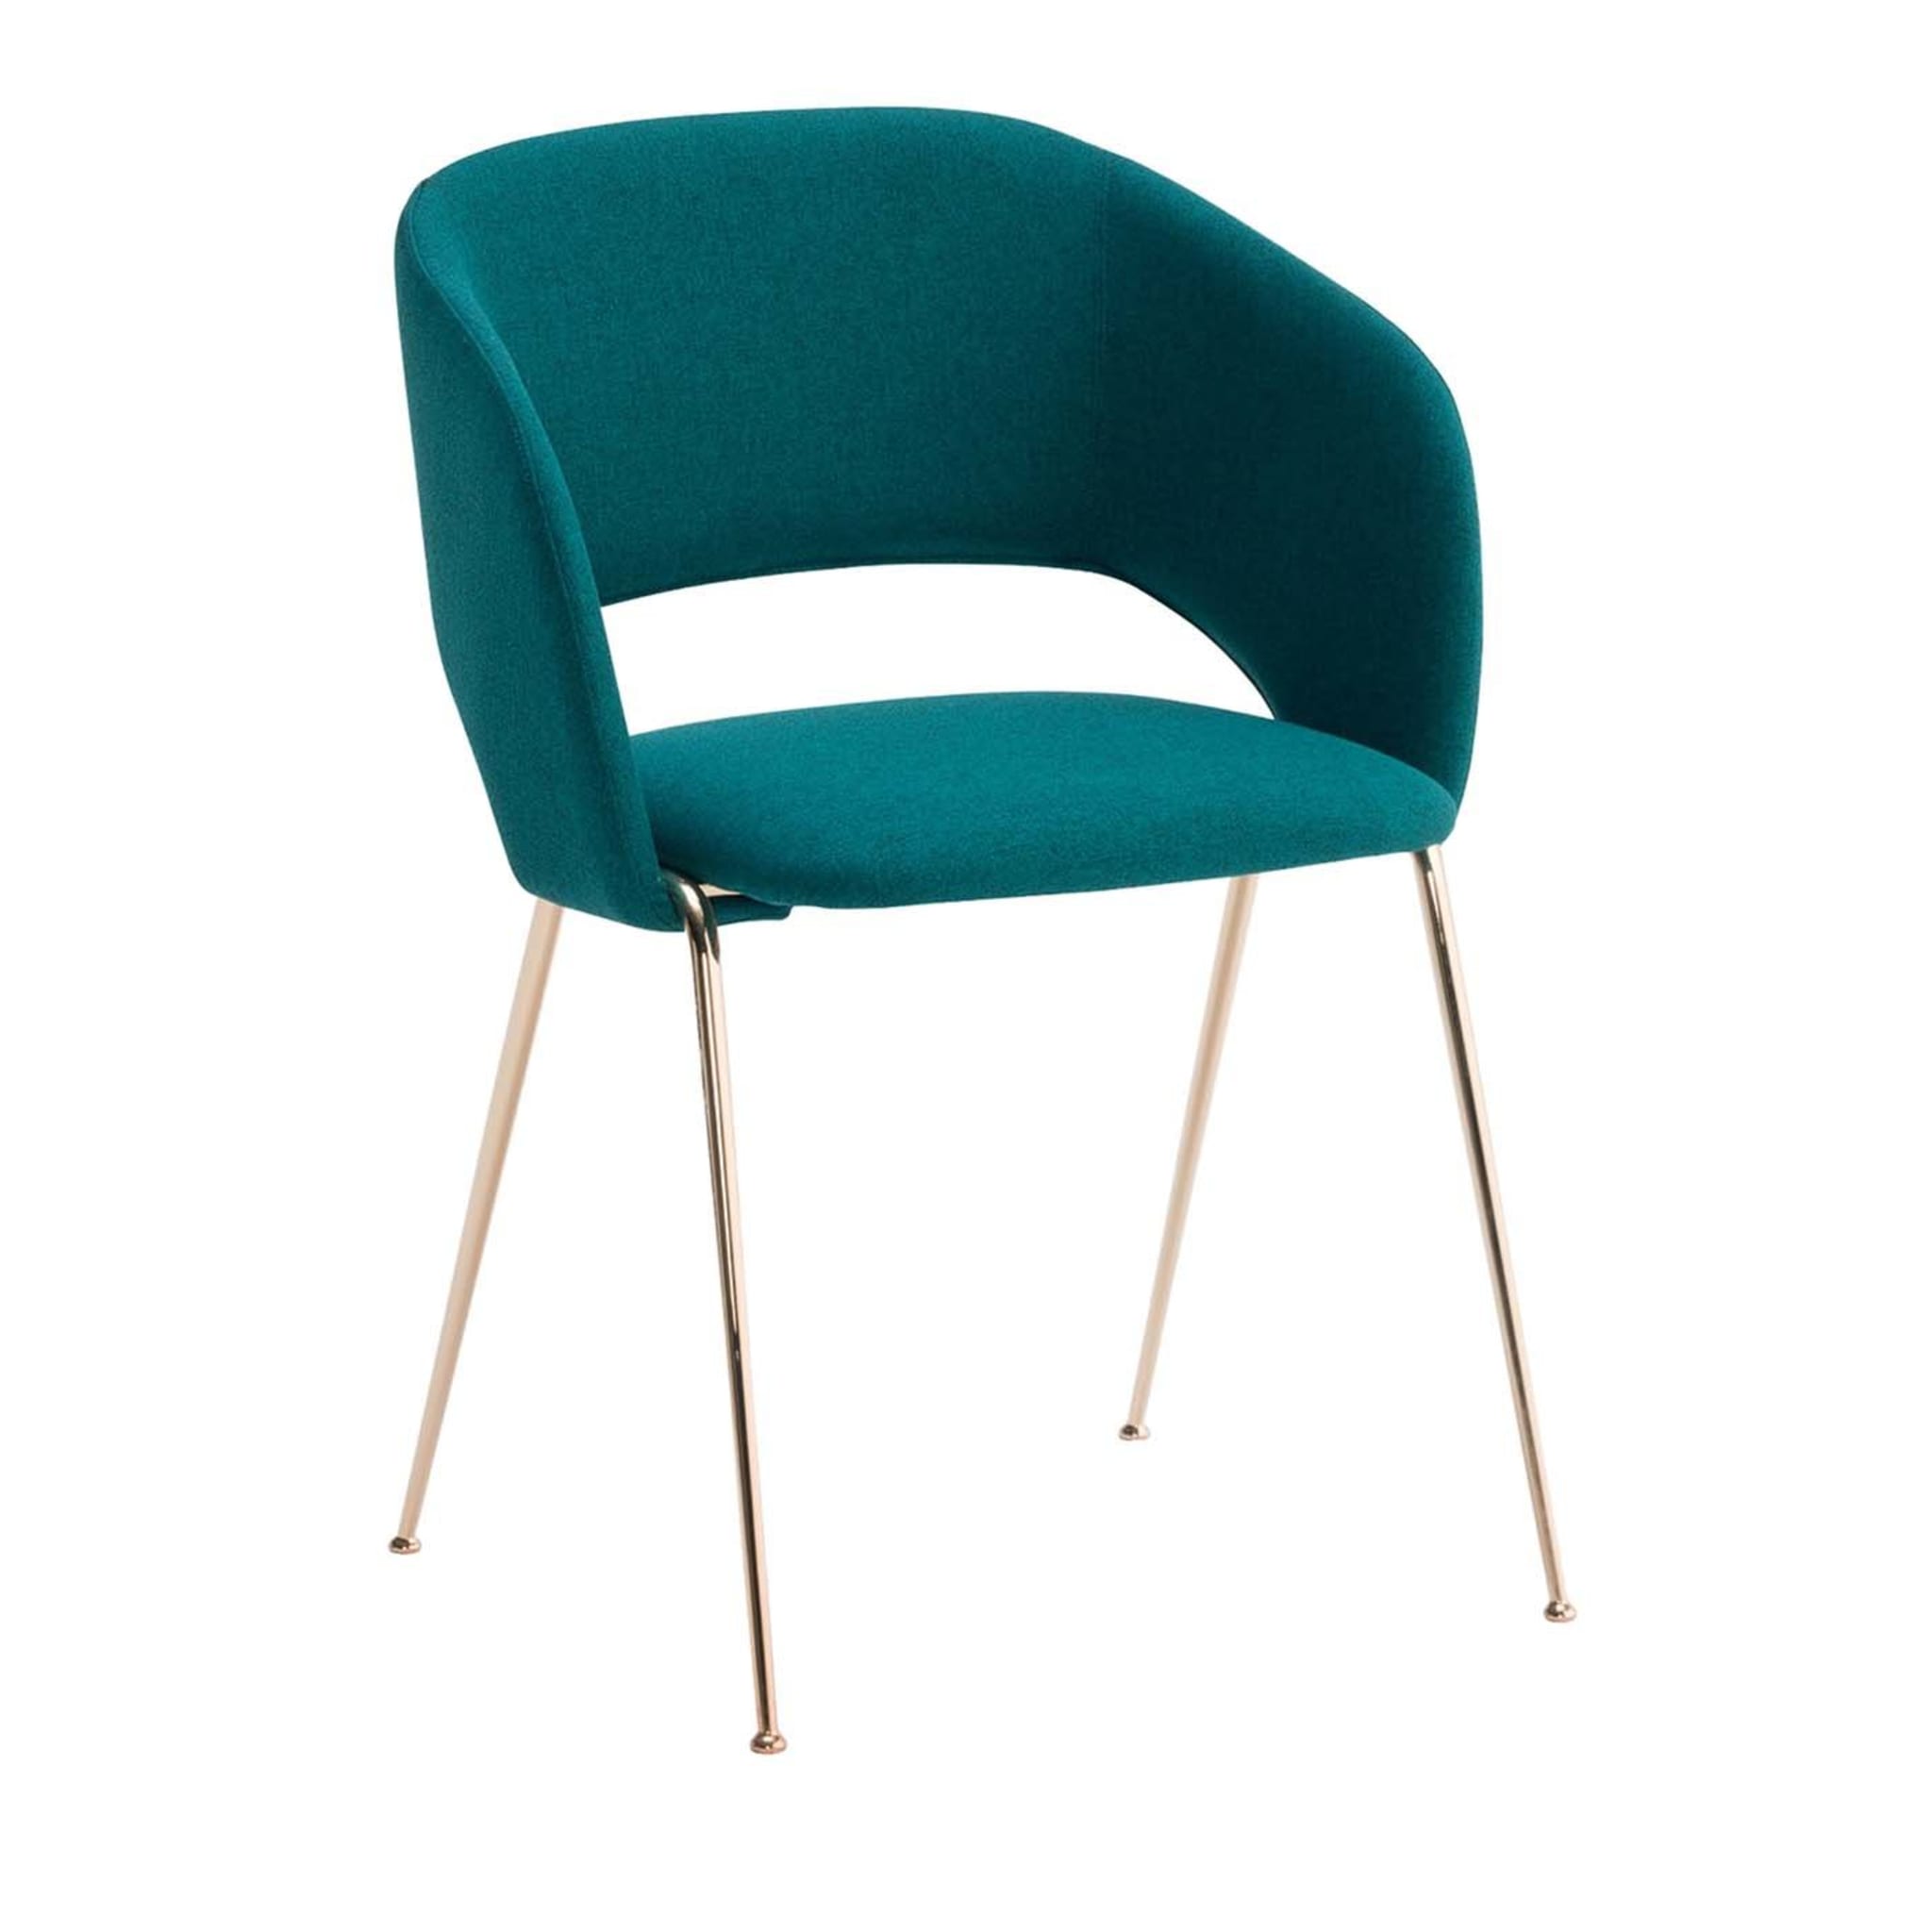 Set of 4 Delice Teal Chairs - Main view